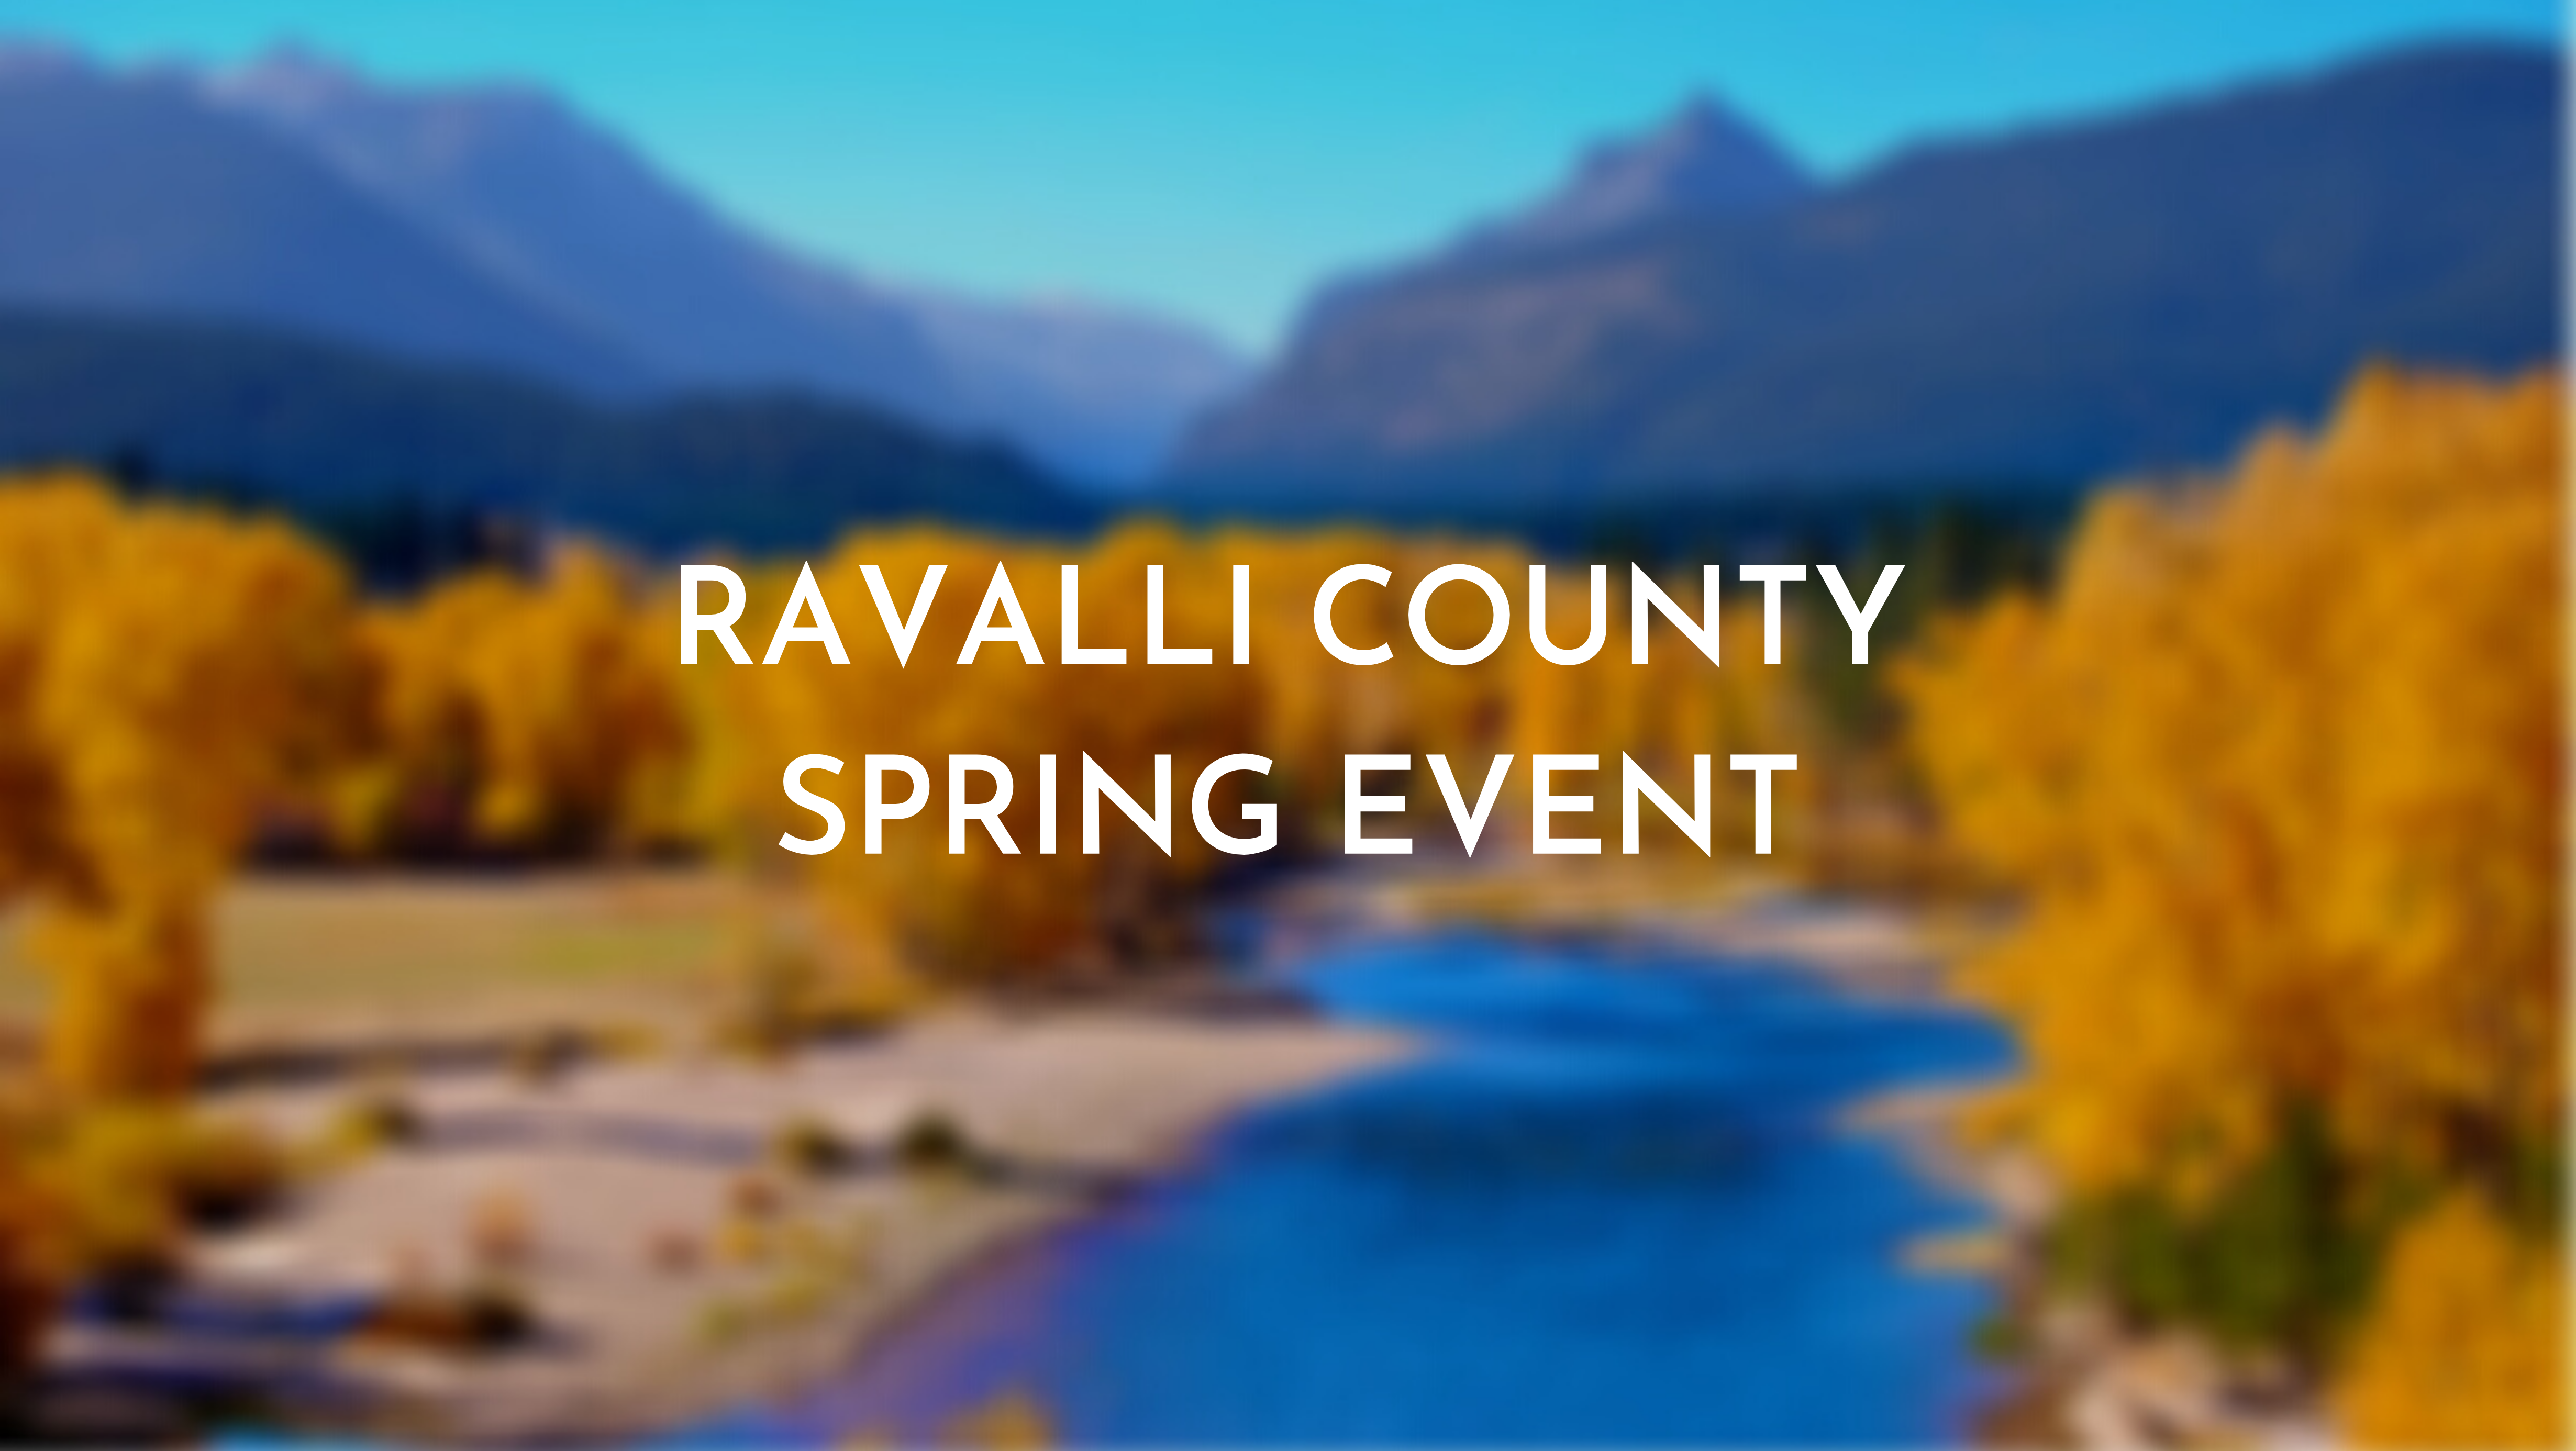 Ravalli County Spring Event on April 17th